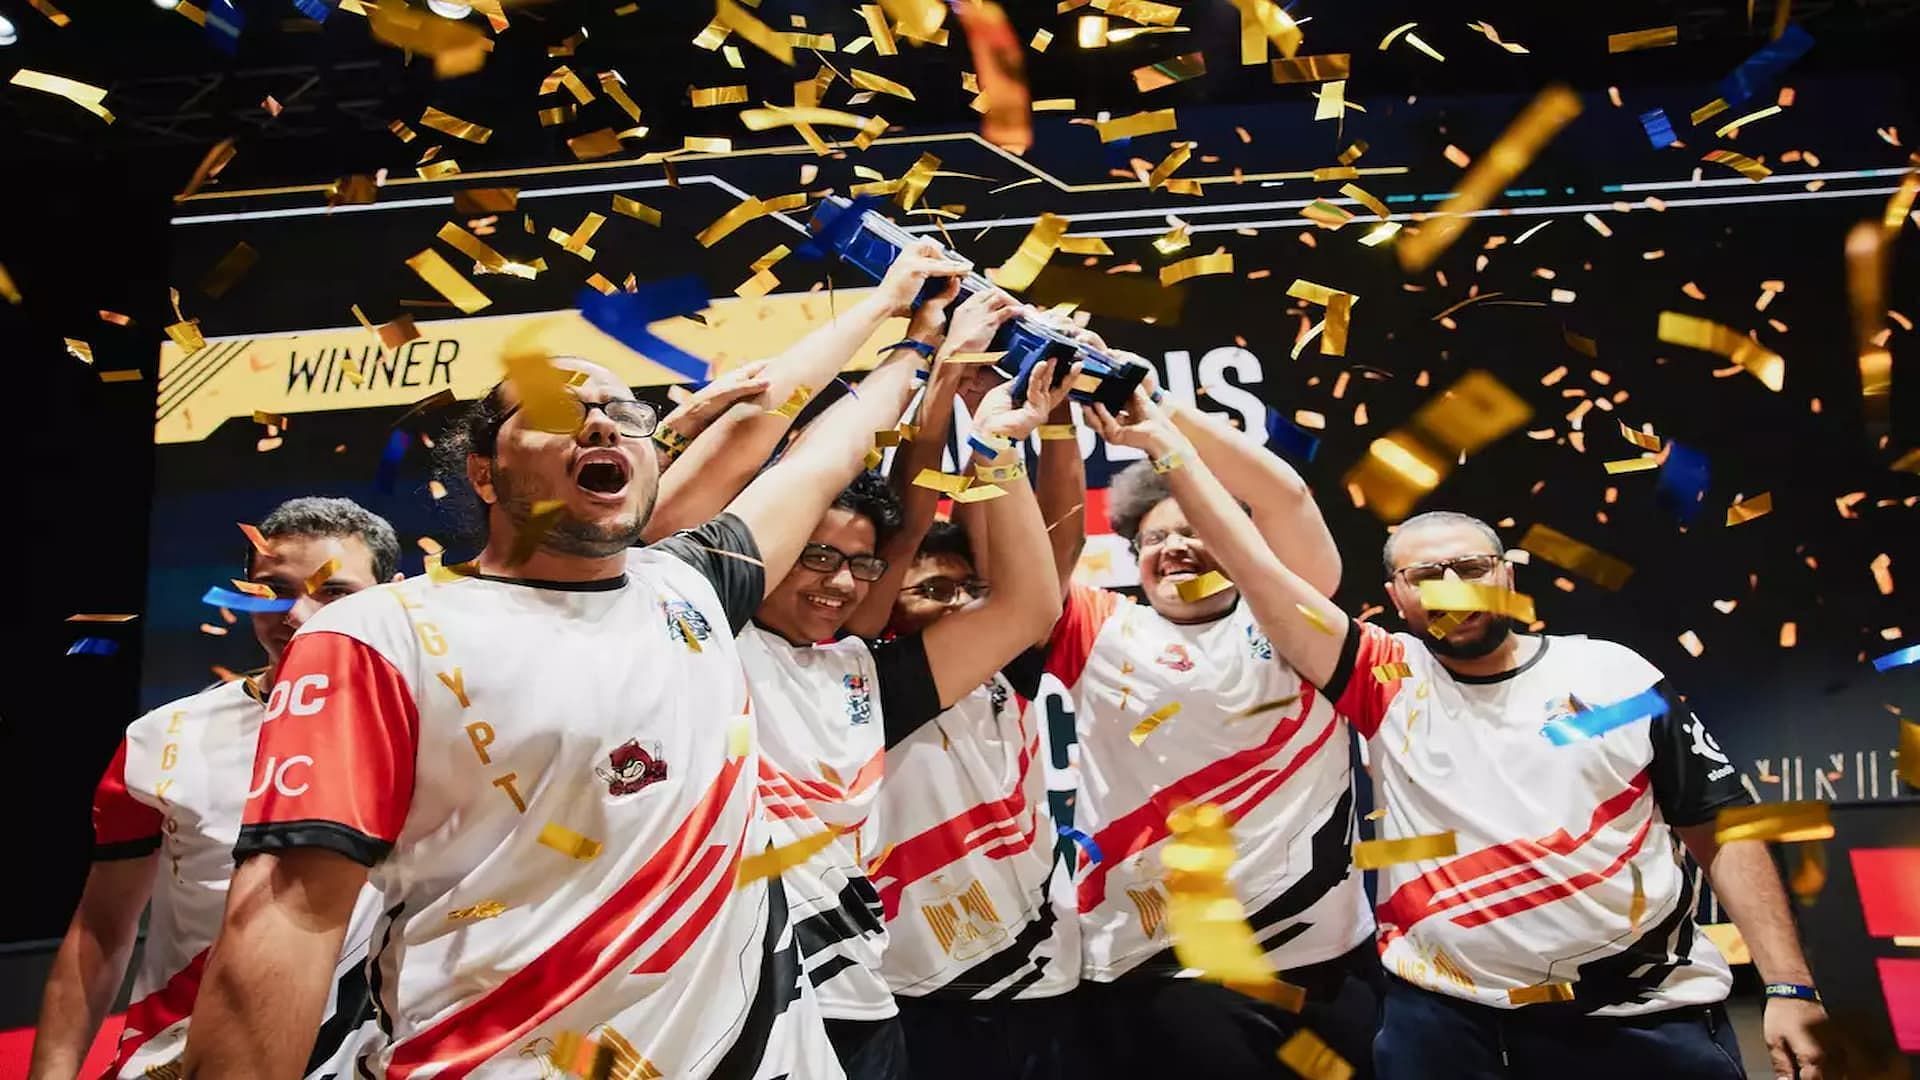 Tuna and his team won the Grand Finals of Red Bull Campus Clutch 2021 (Image via Red Bull)